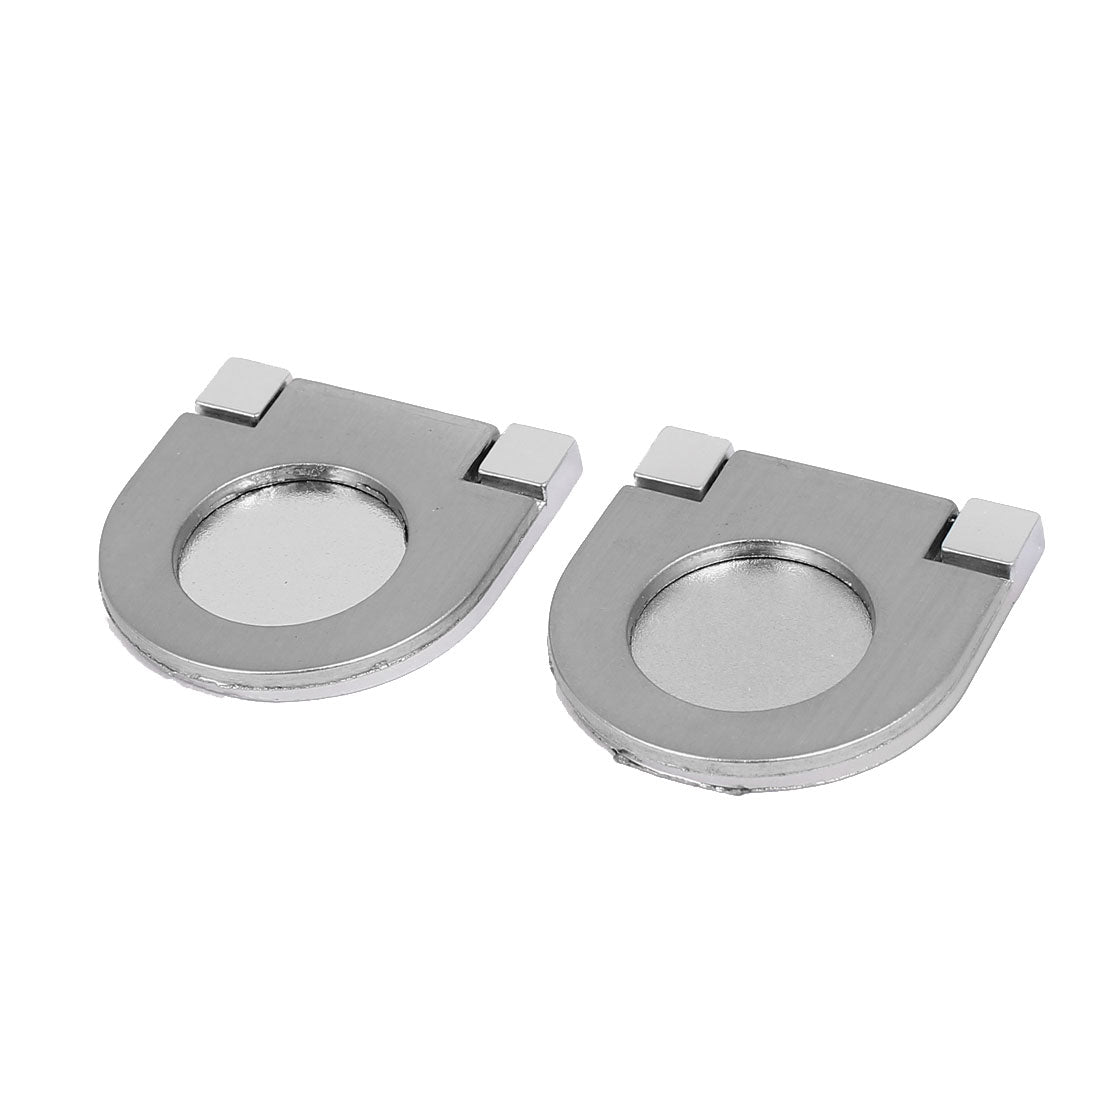 uxcell Uxcell Wardrobe Drawer Concealed Hidden Recessed Grip Pull Handle Silver Tone 2pcs